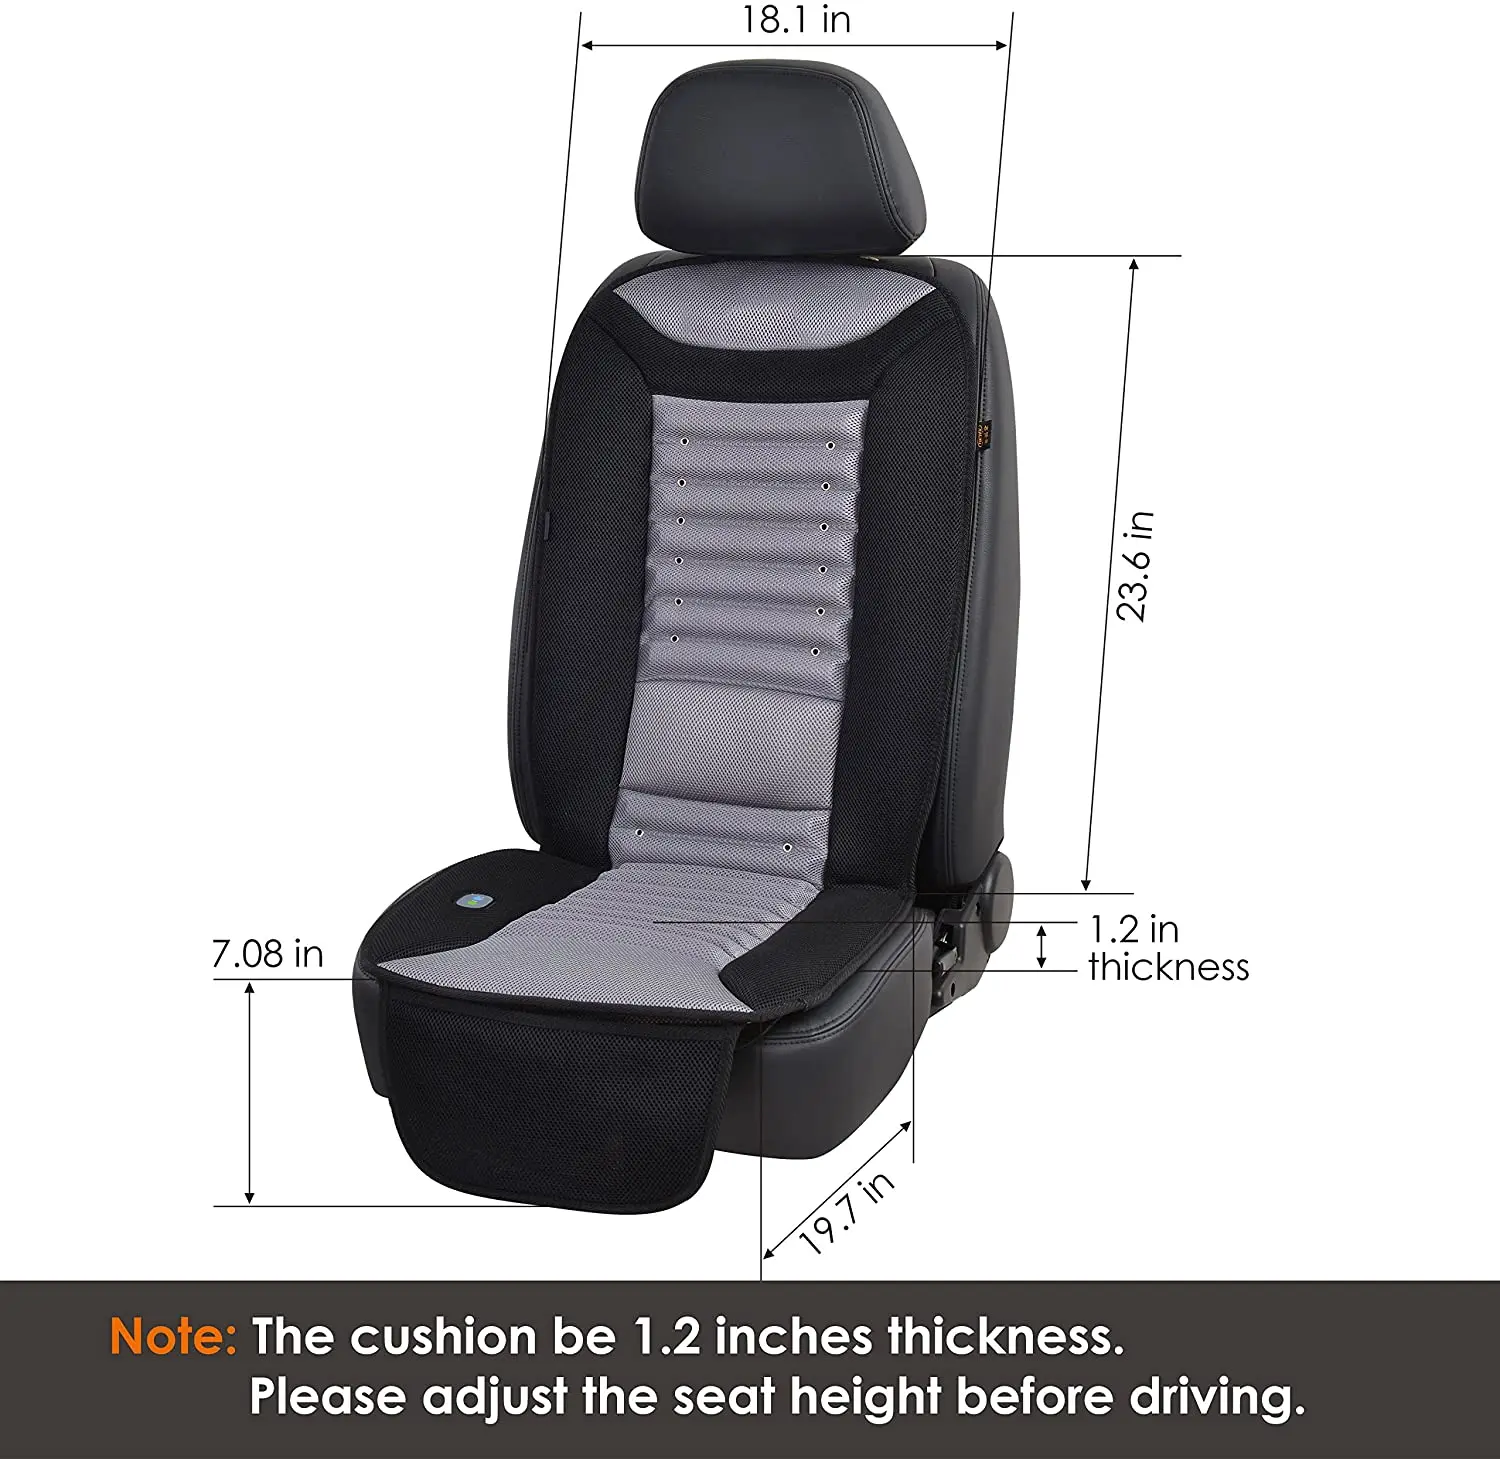 Adjustable Cool Air Car Seat Cushion,Universal Fit for Car,Truck Home Office Chair COMFIER Cooling seat Cushion with Lower Back Massage 12/24V Automotive Car Seat Cooling Pad 